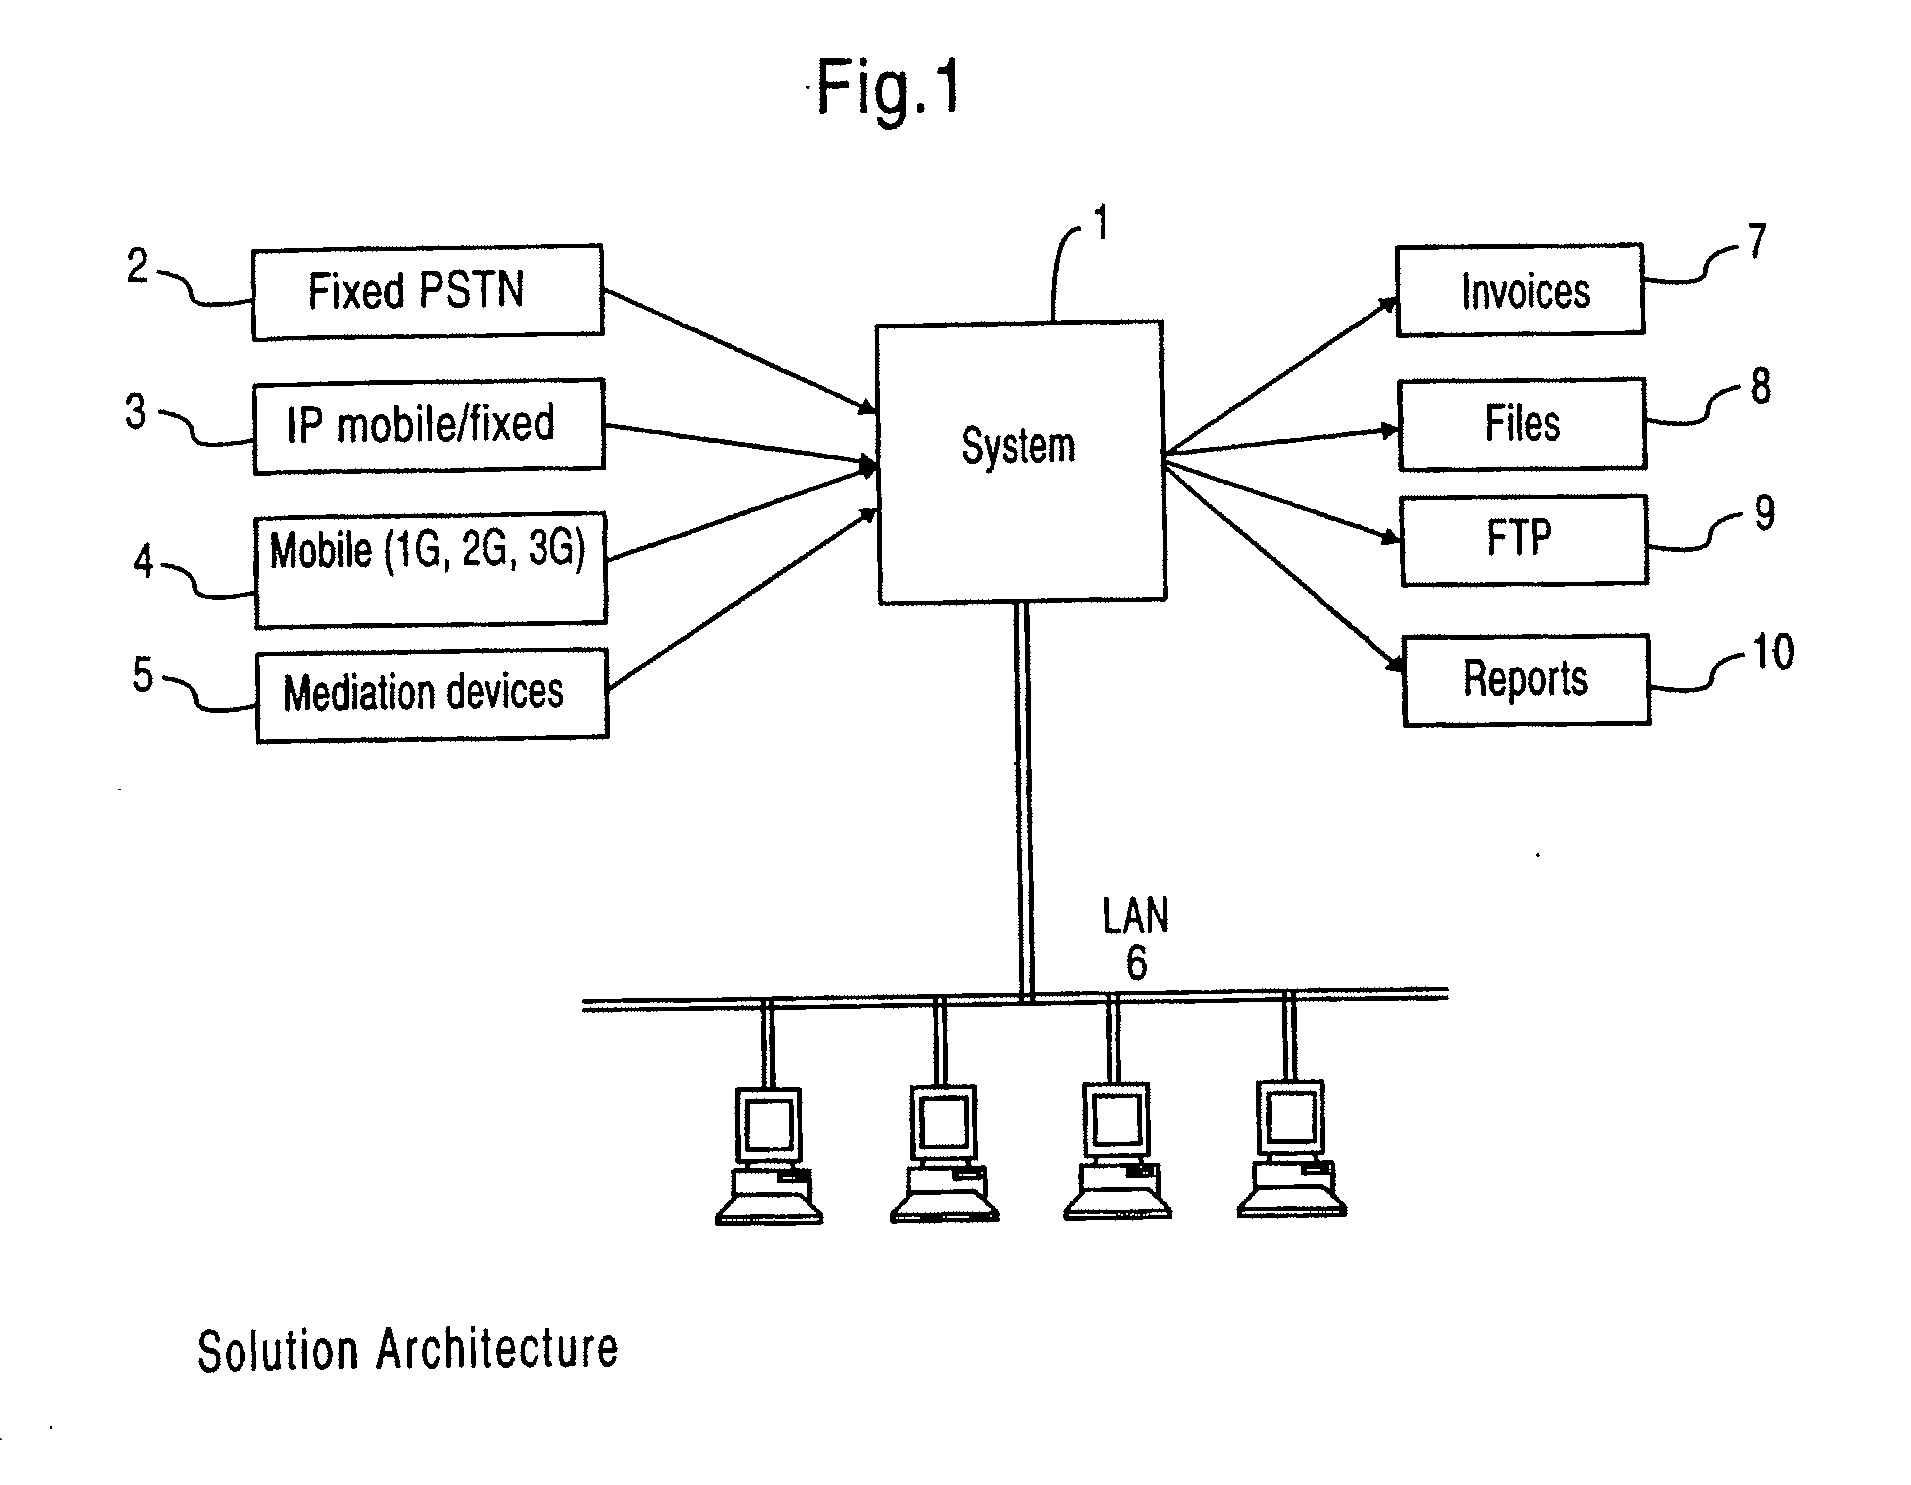 Real-time interconnect billing system and method of use